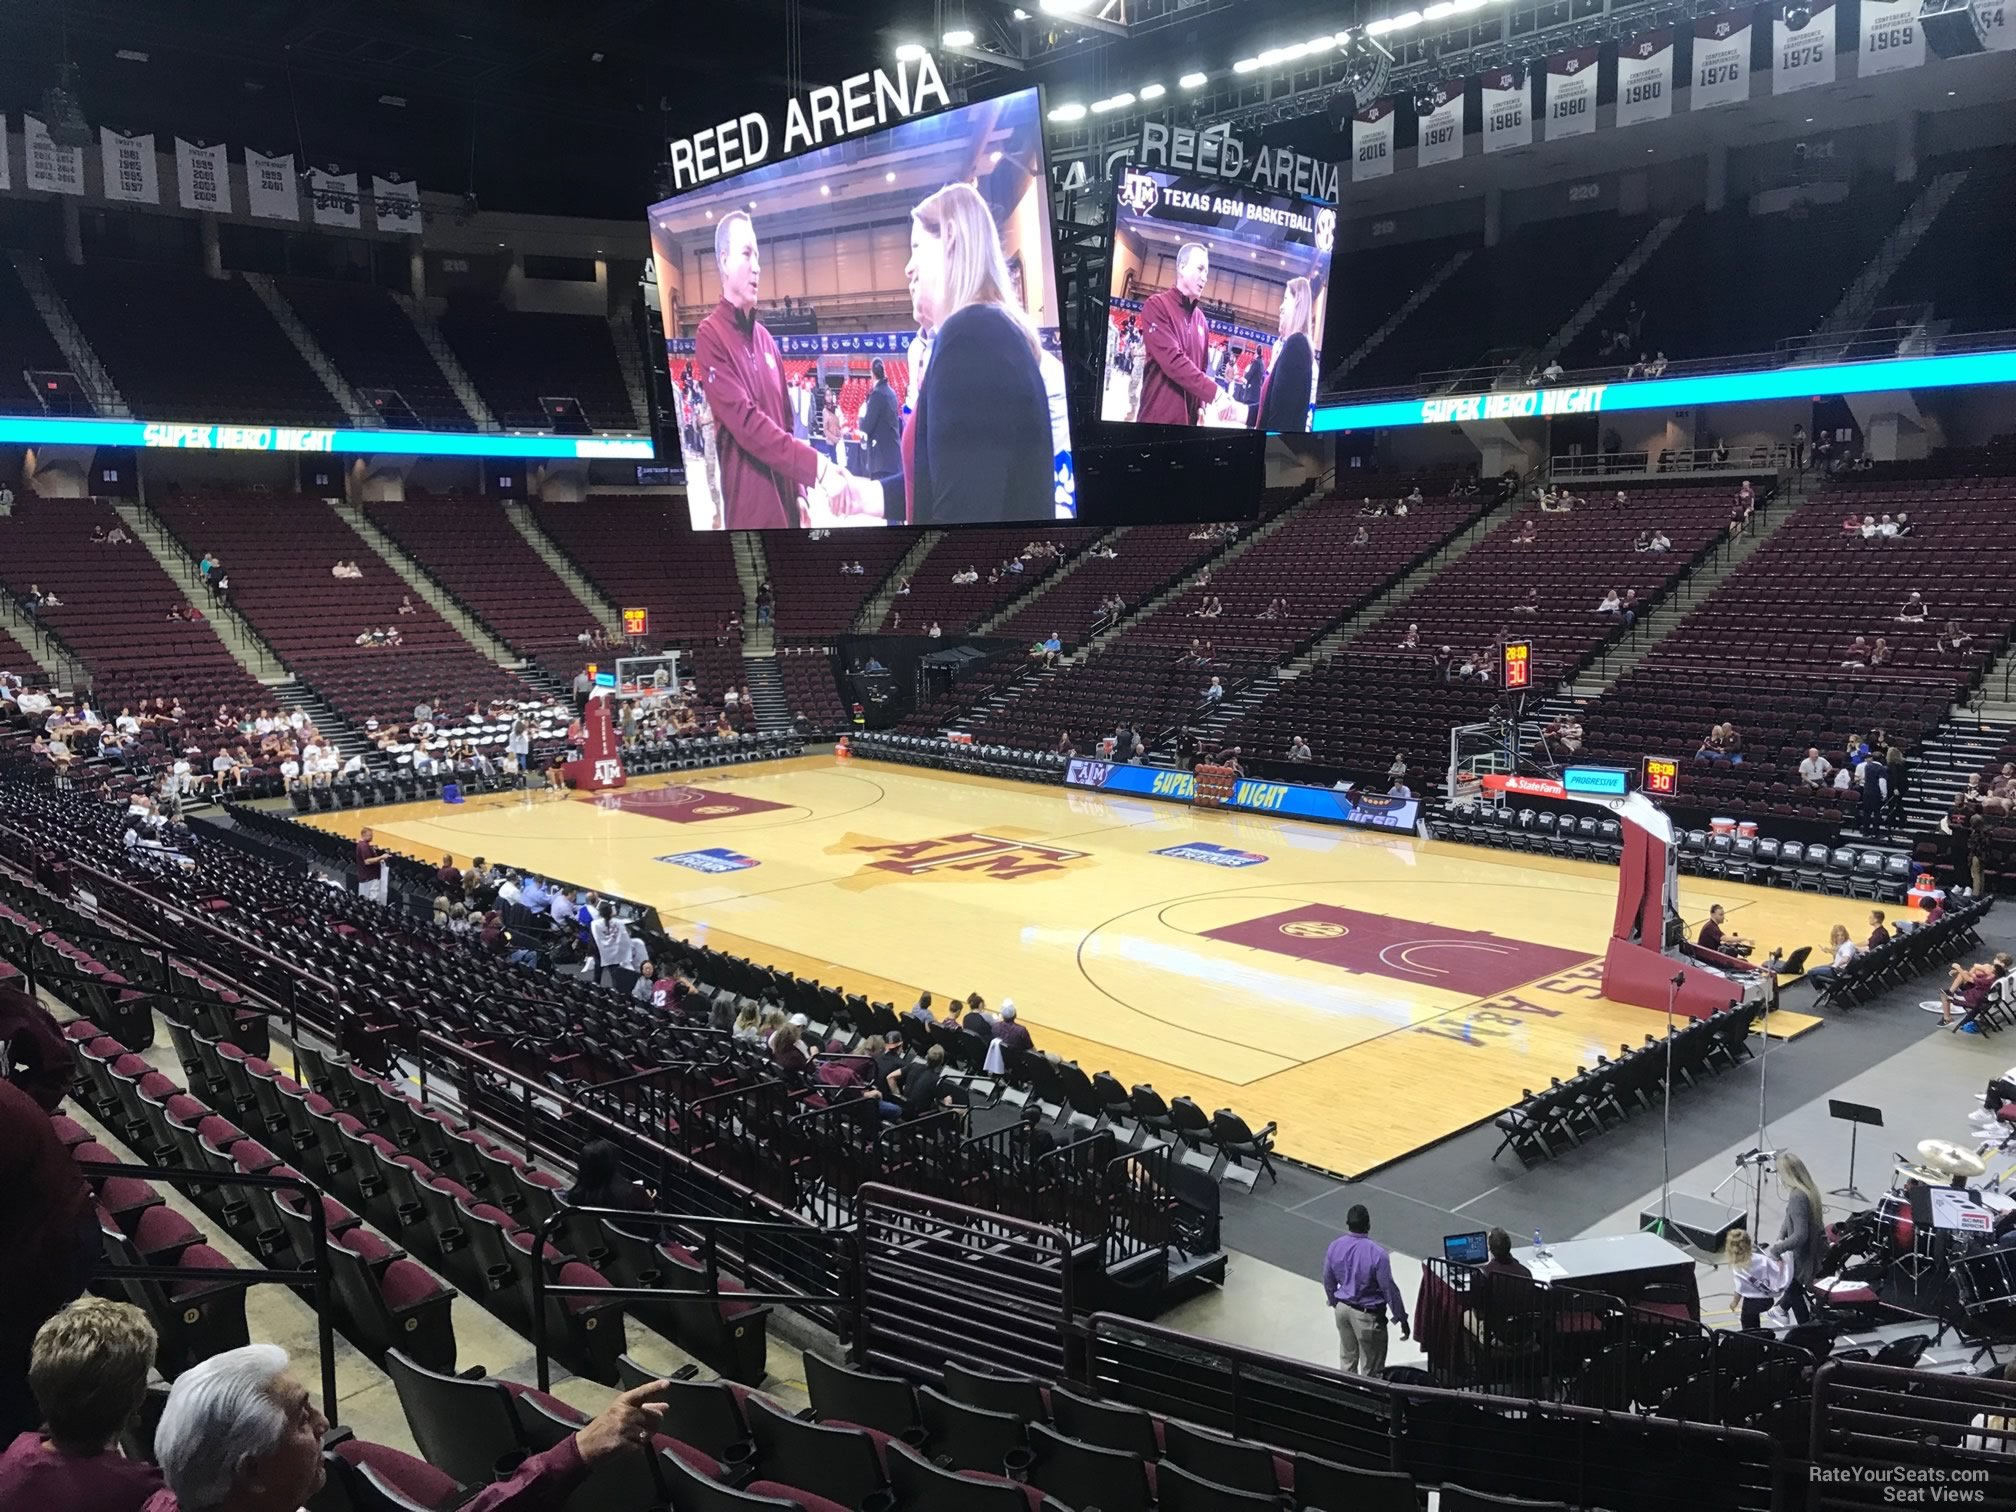 section 102, row j seat view  - reed arena